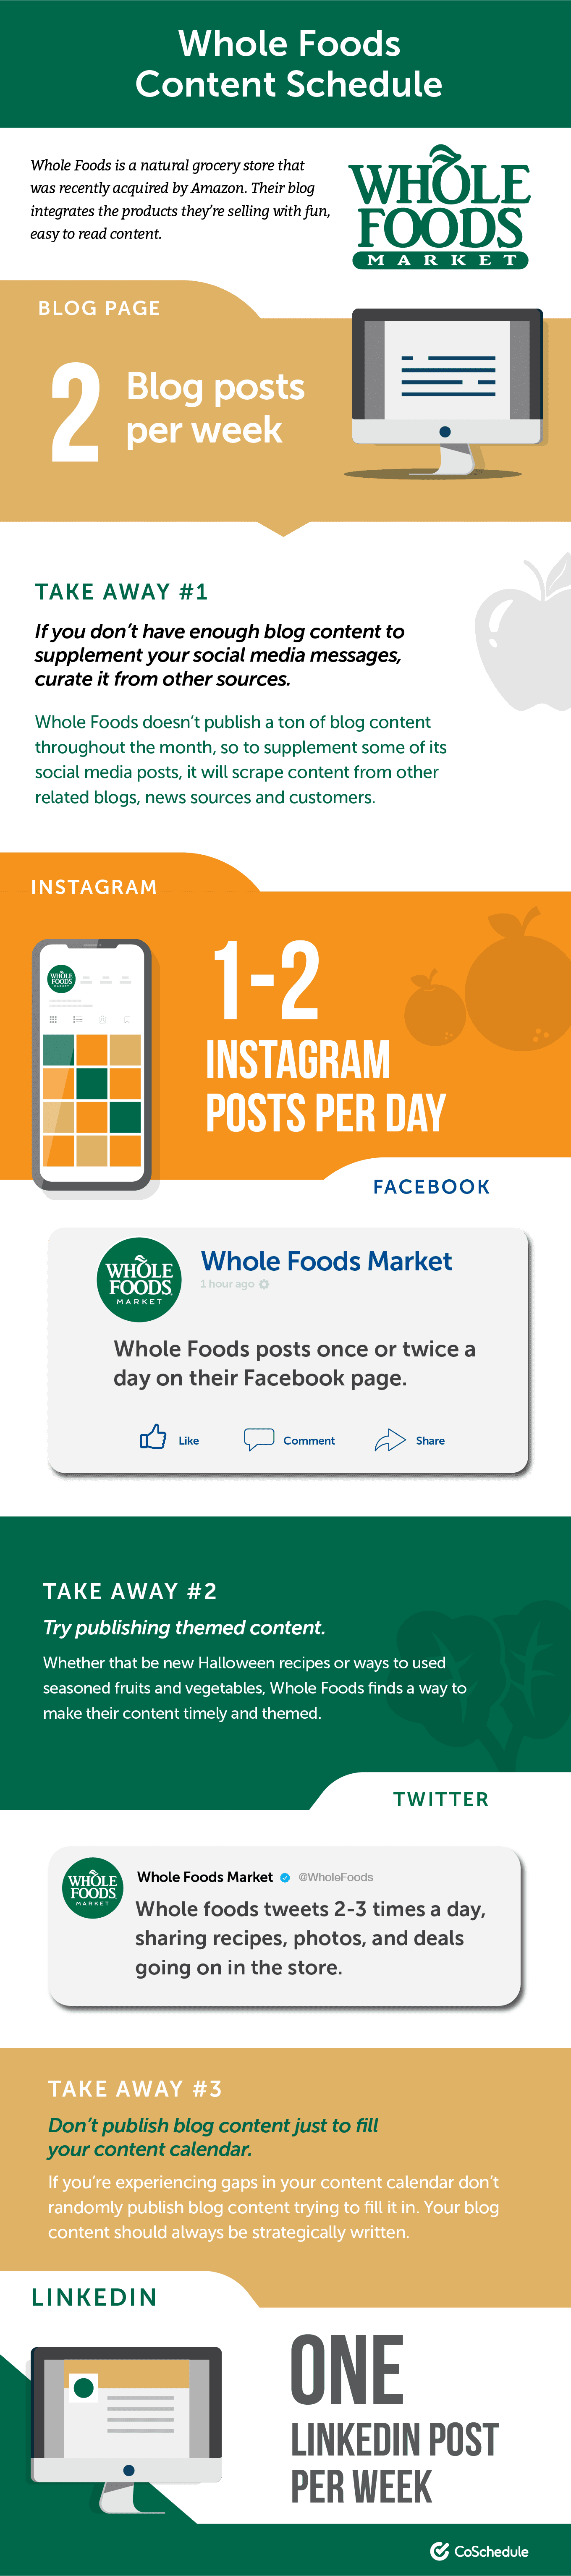 Whole Foods content schedule